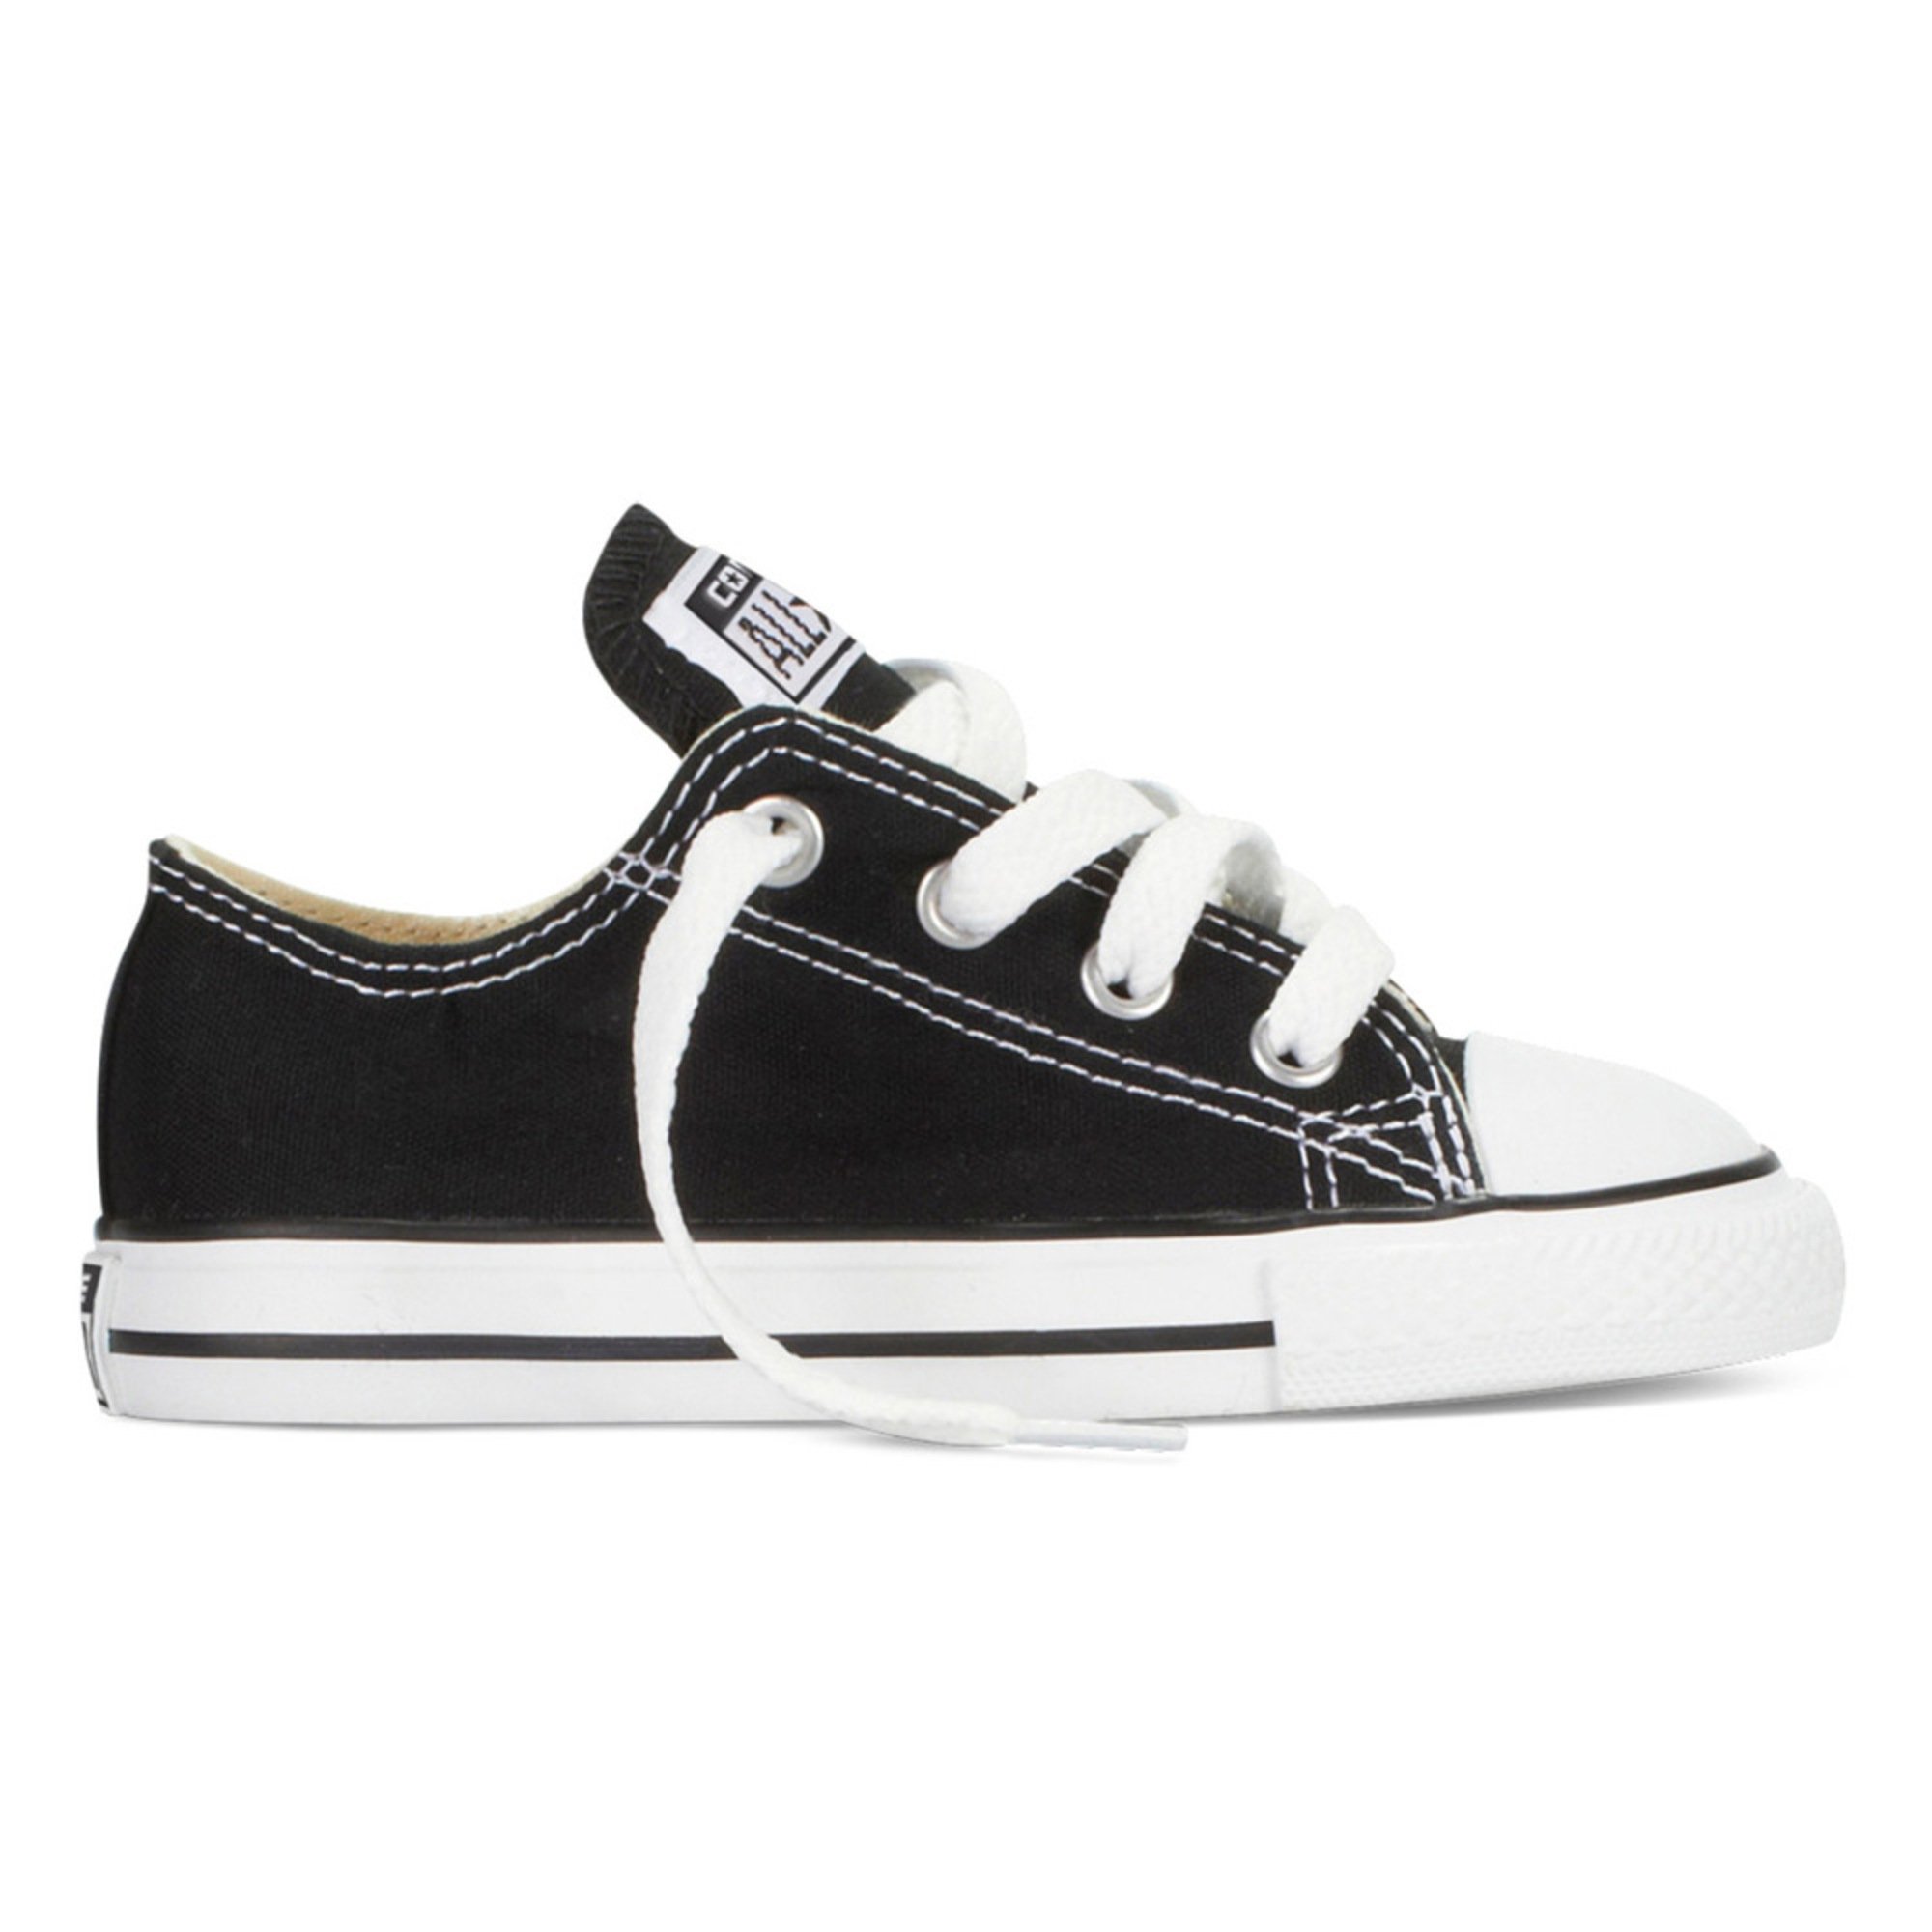 Converse Boy's Chuck Taylor All Star Lo-top Sneaker (infant/toddler ...